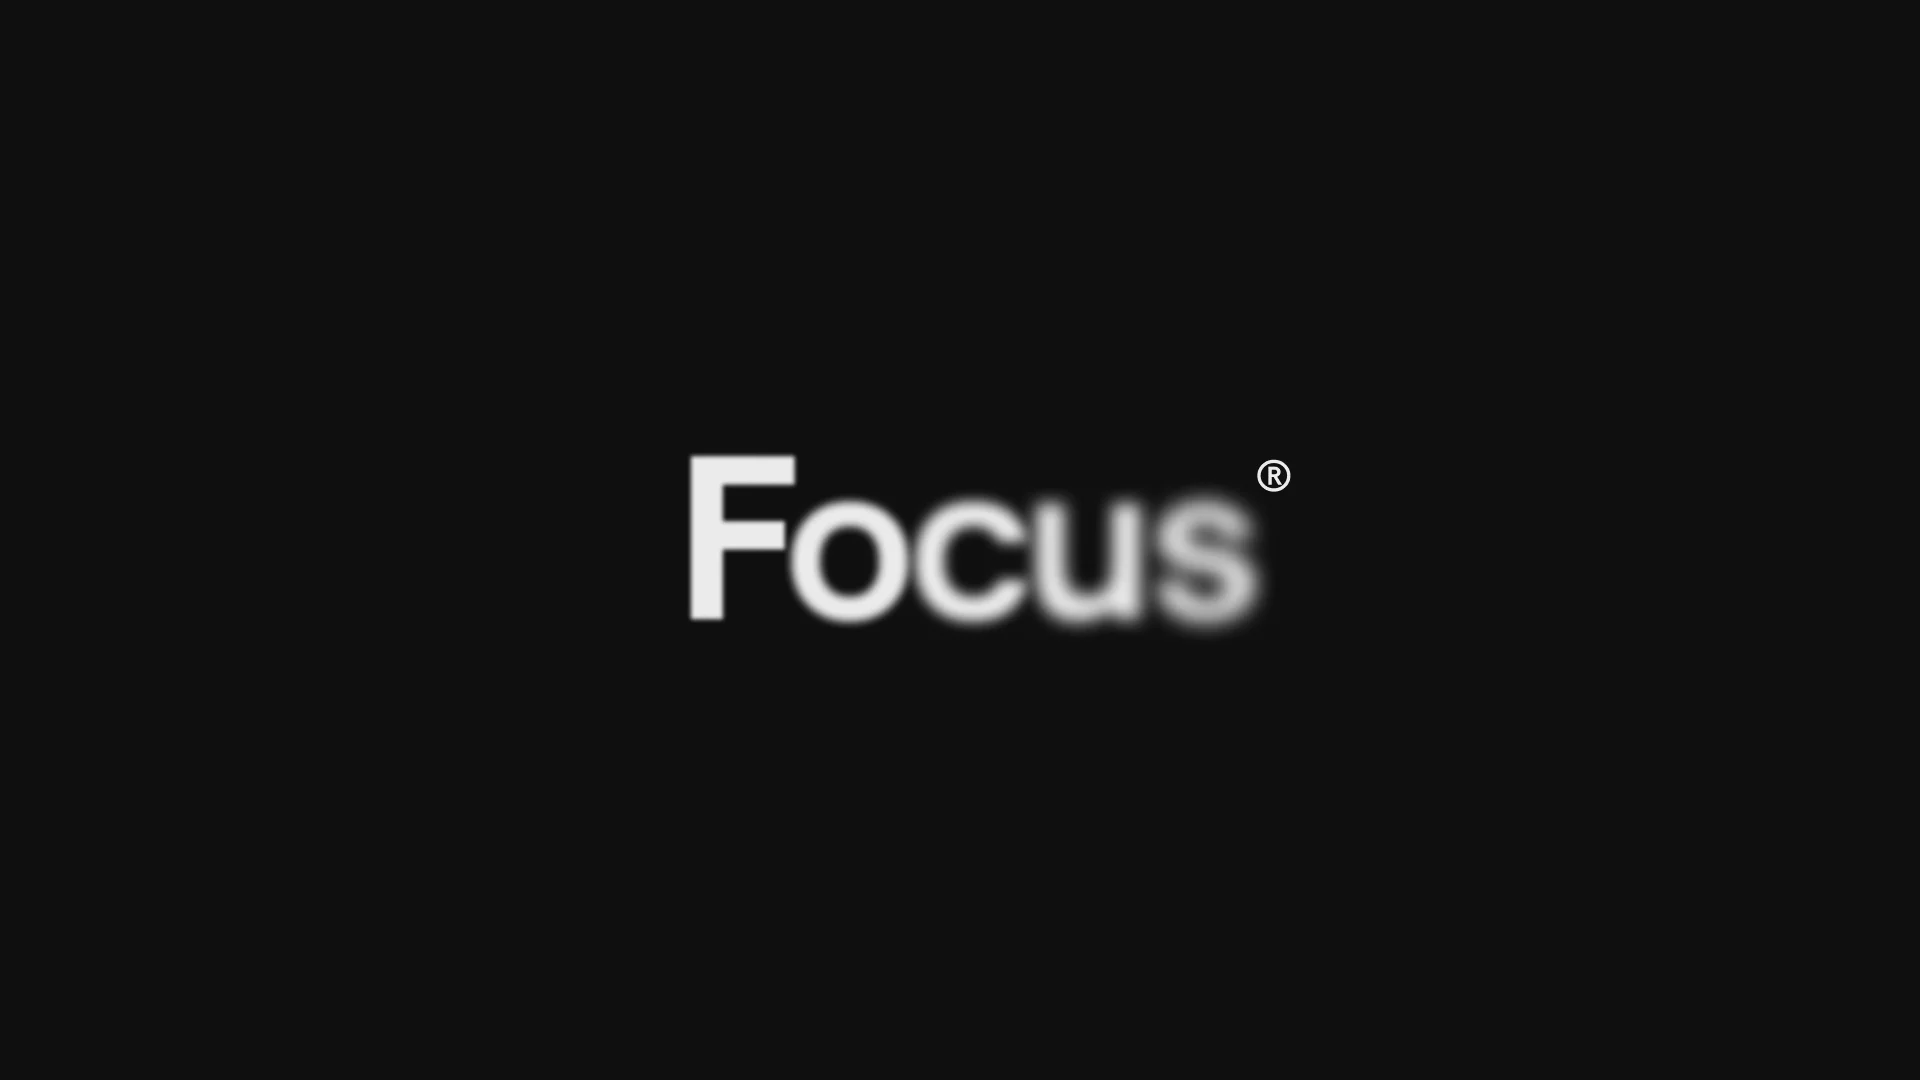 Focus Project Images